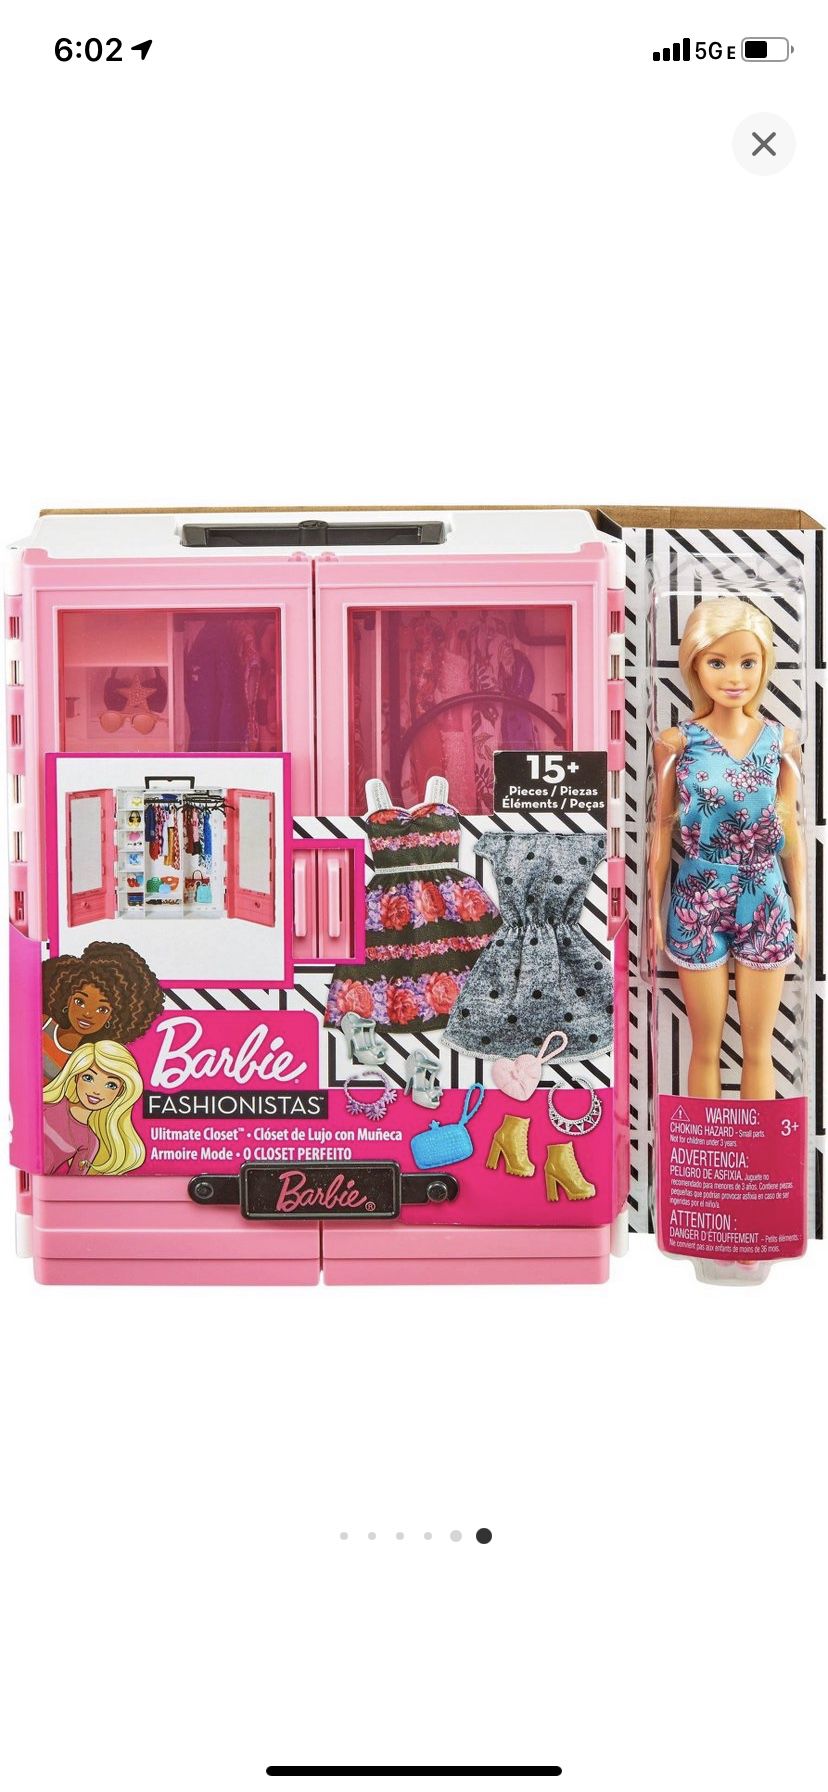 Barbie Fashionistas Ultimate Closet Portable Fashion Toy with Doll, clothes and accessories. New in Box. Local Pickup in Homestead, Florida. Shipping 